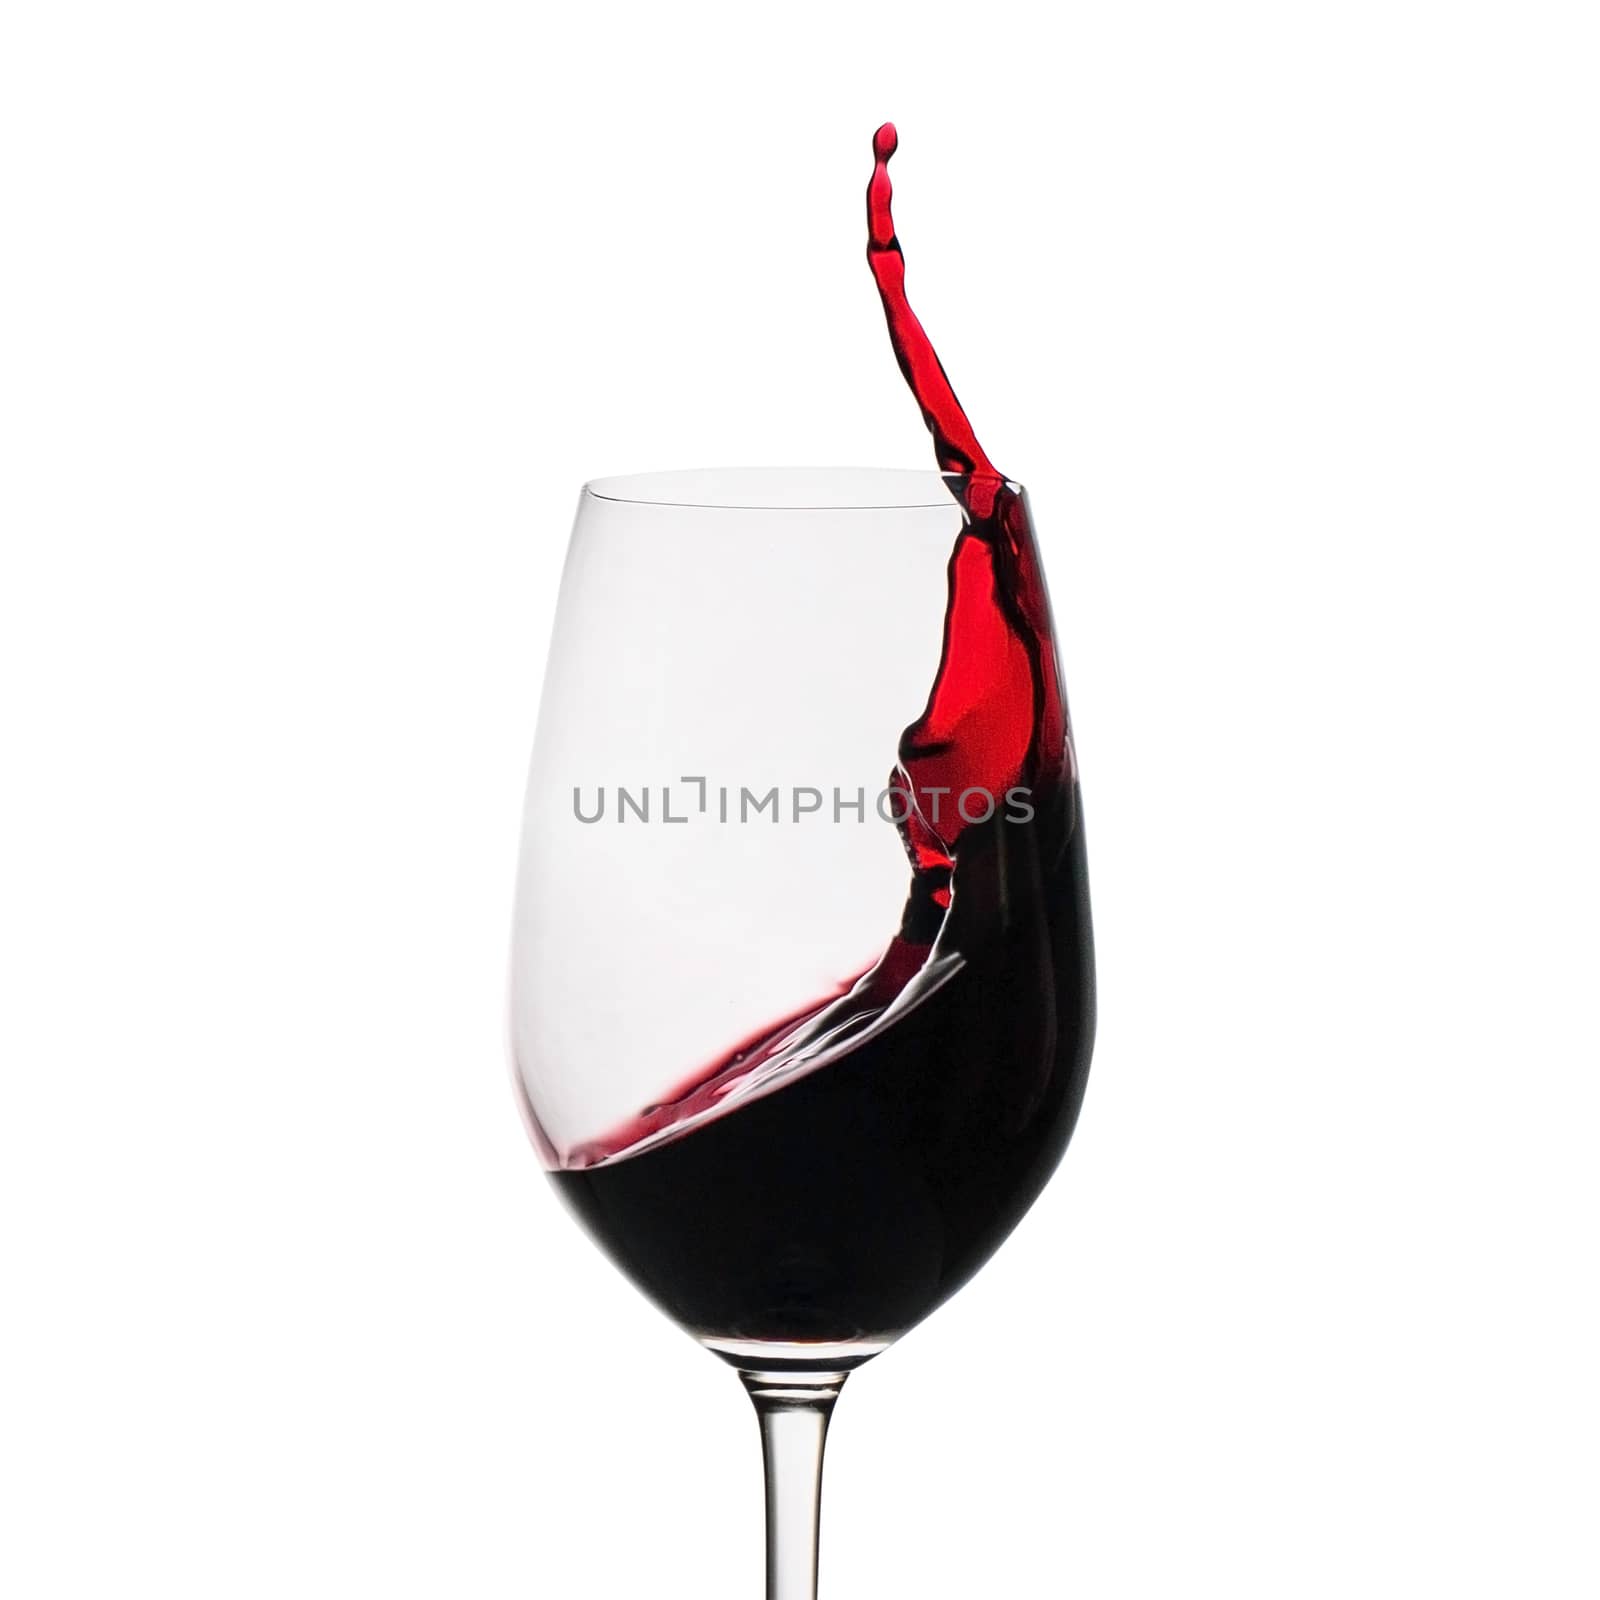 Freeze motion of red wine splashing up the side in a wineglass isolated on white with copy space